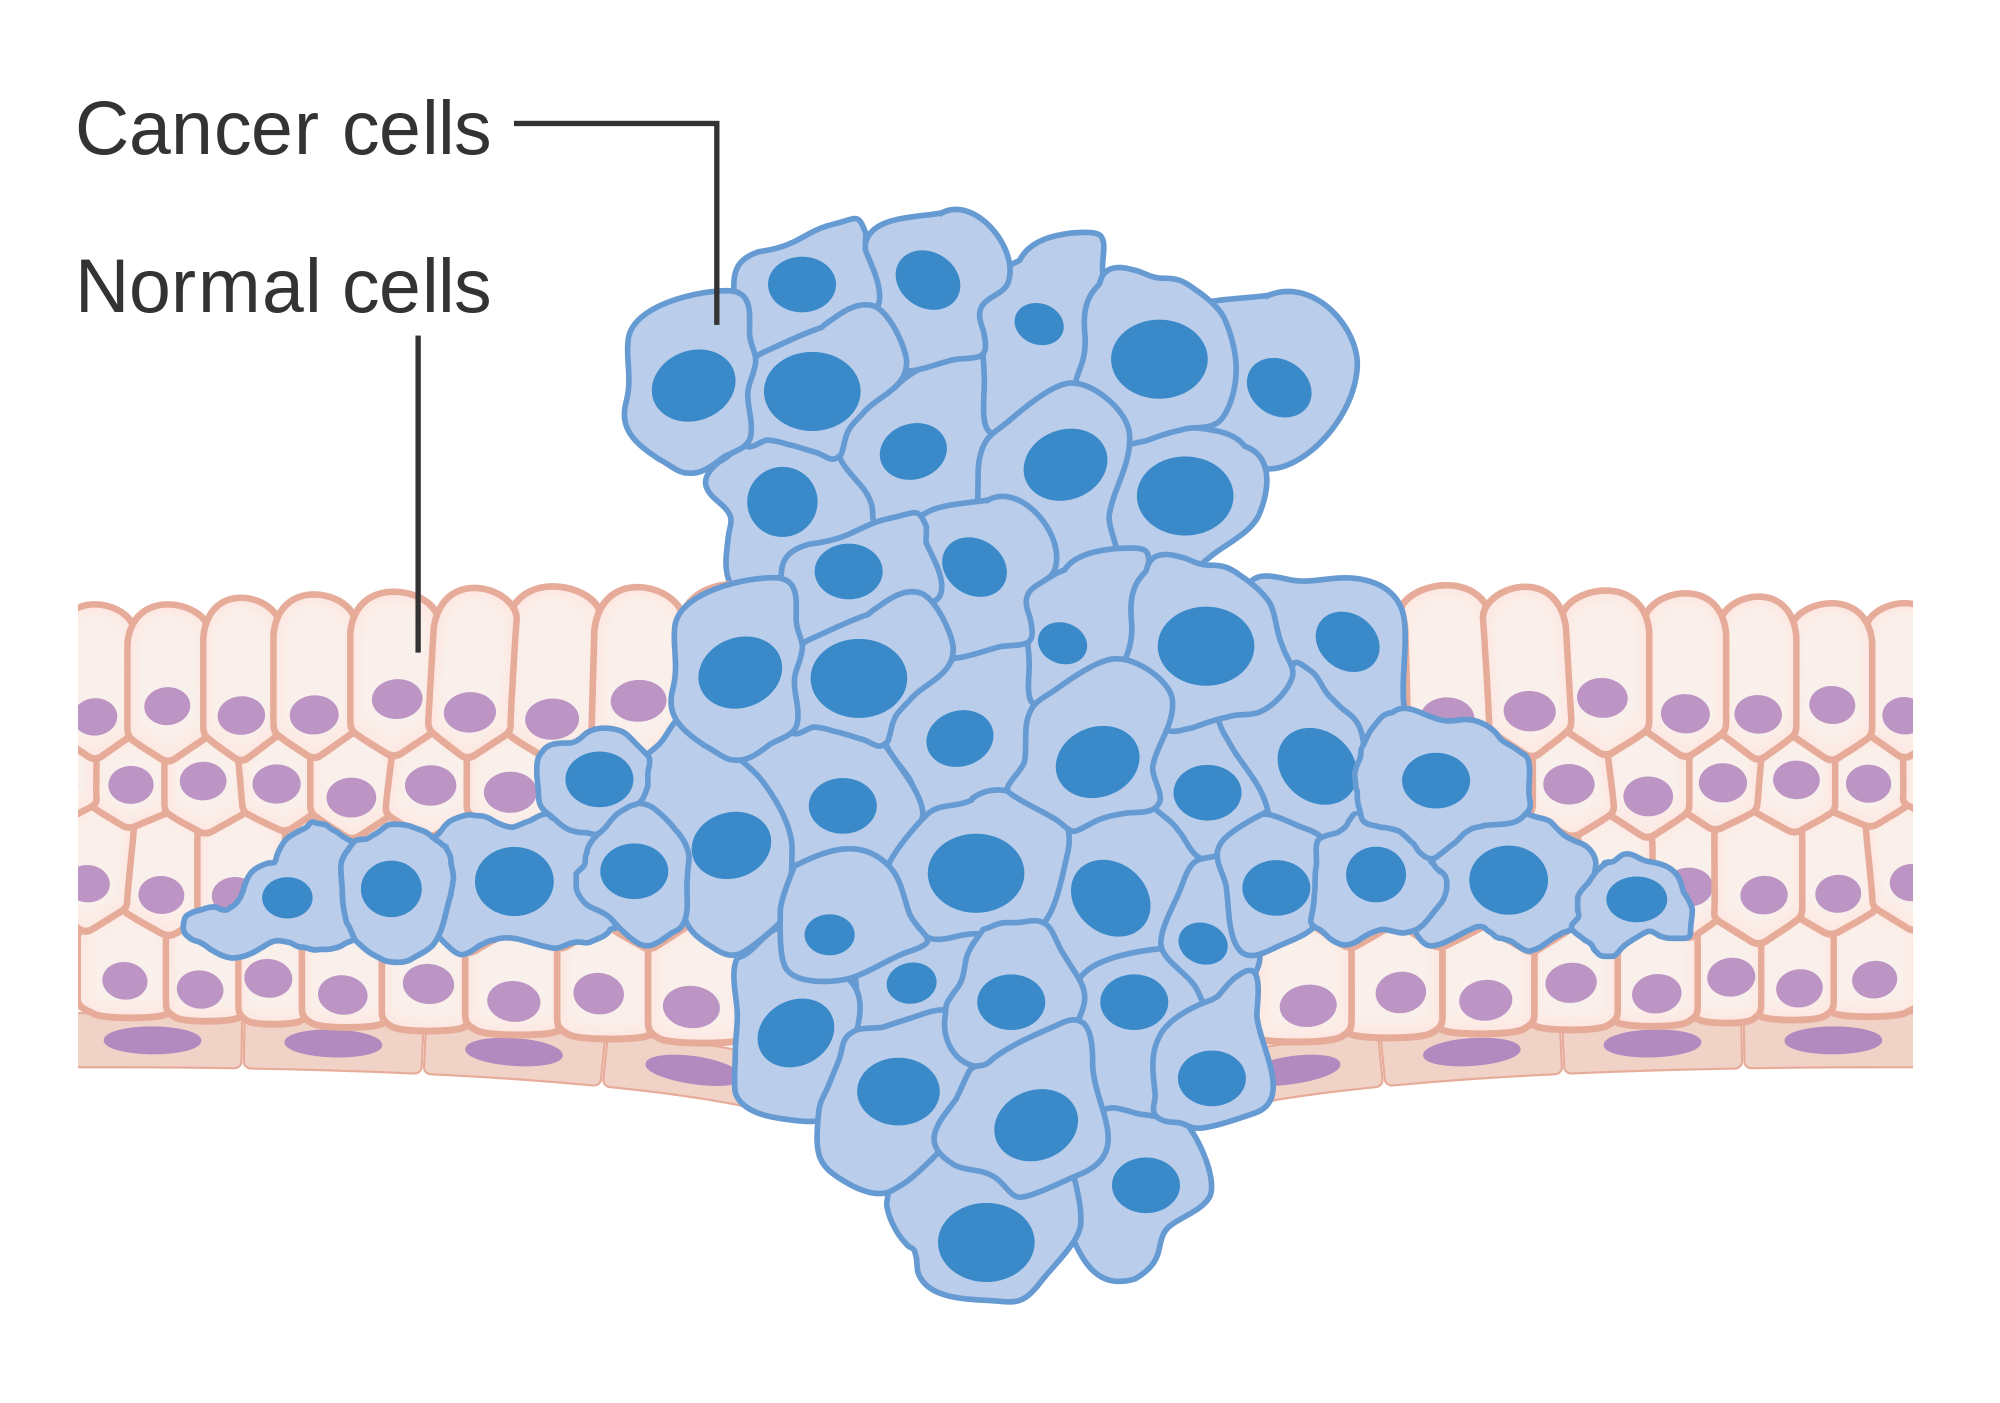 Formation of a tumor forcing its way into the adjacent tissues